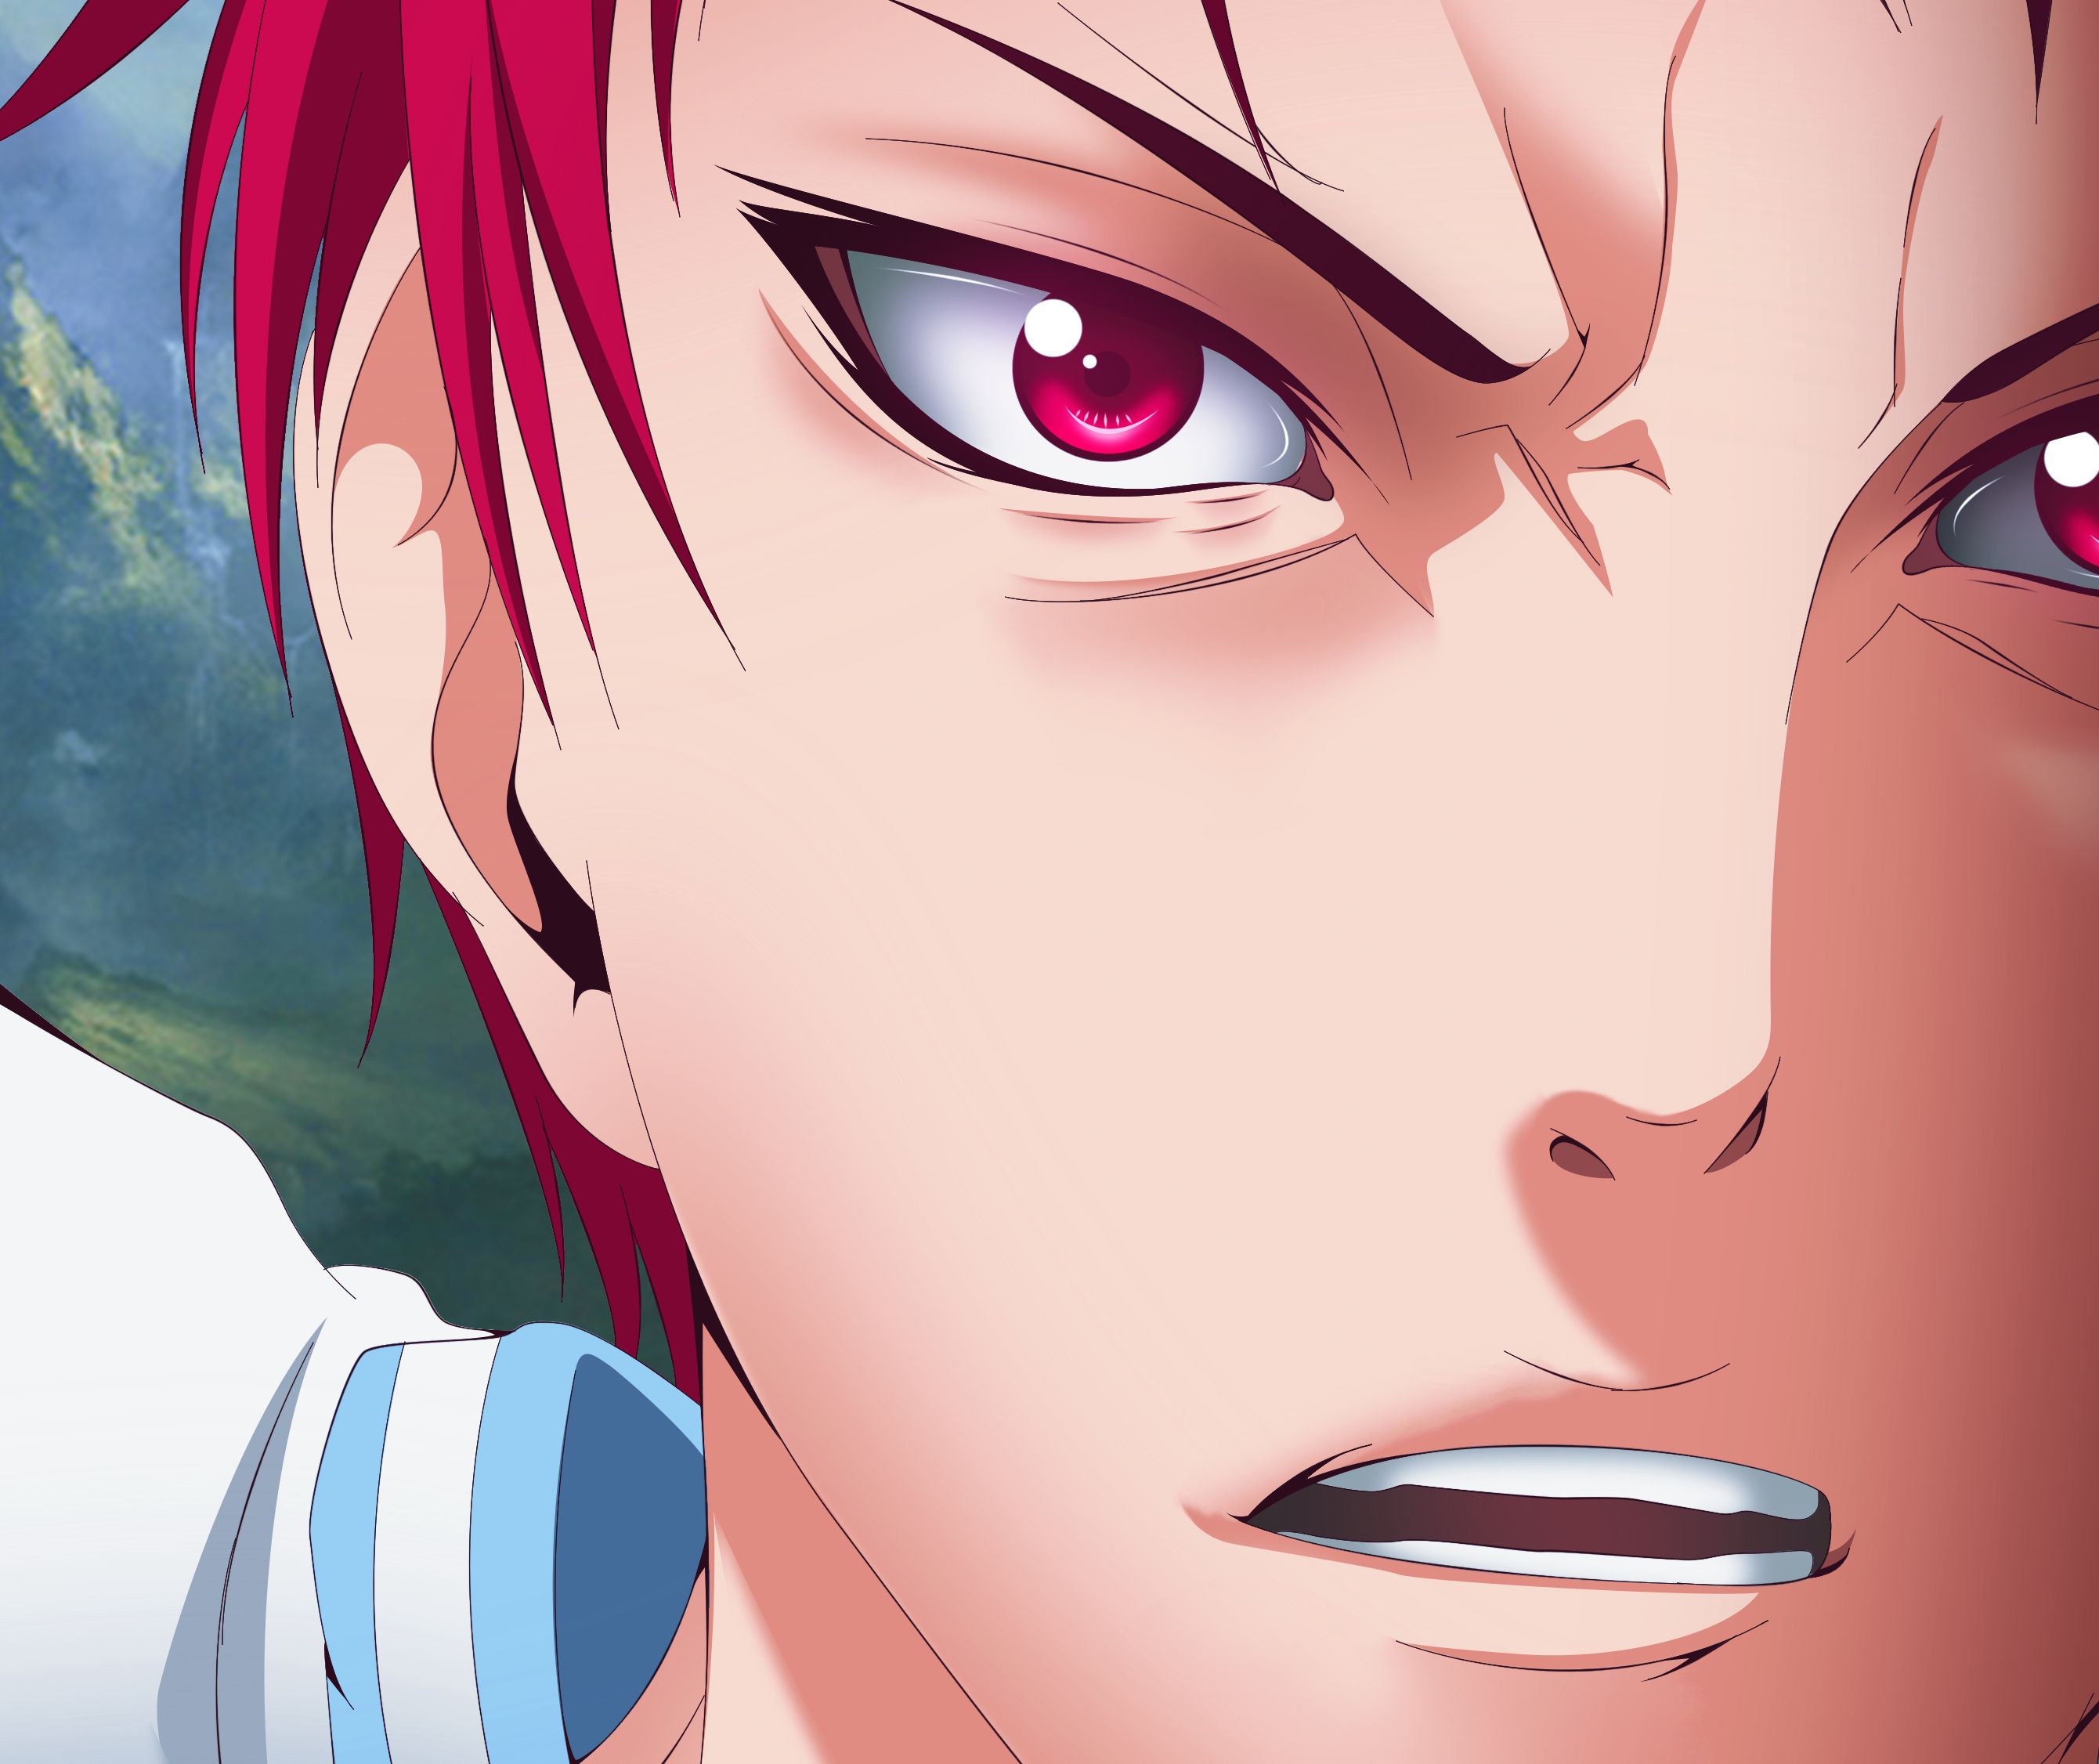 Kuroko's Basketball: Why a Sequel Could Be the Perfect Sports Anime